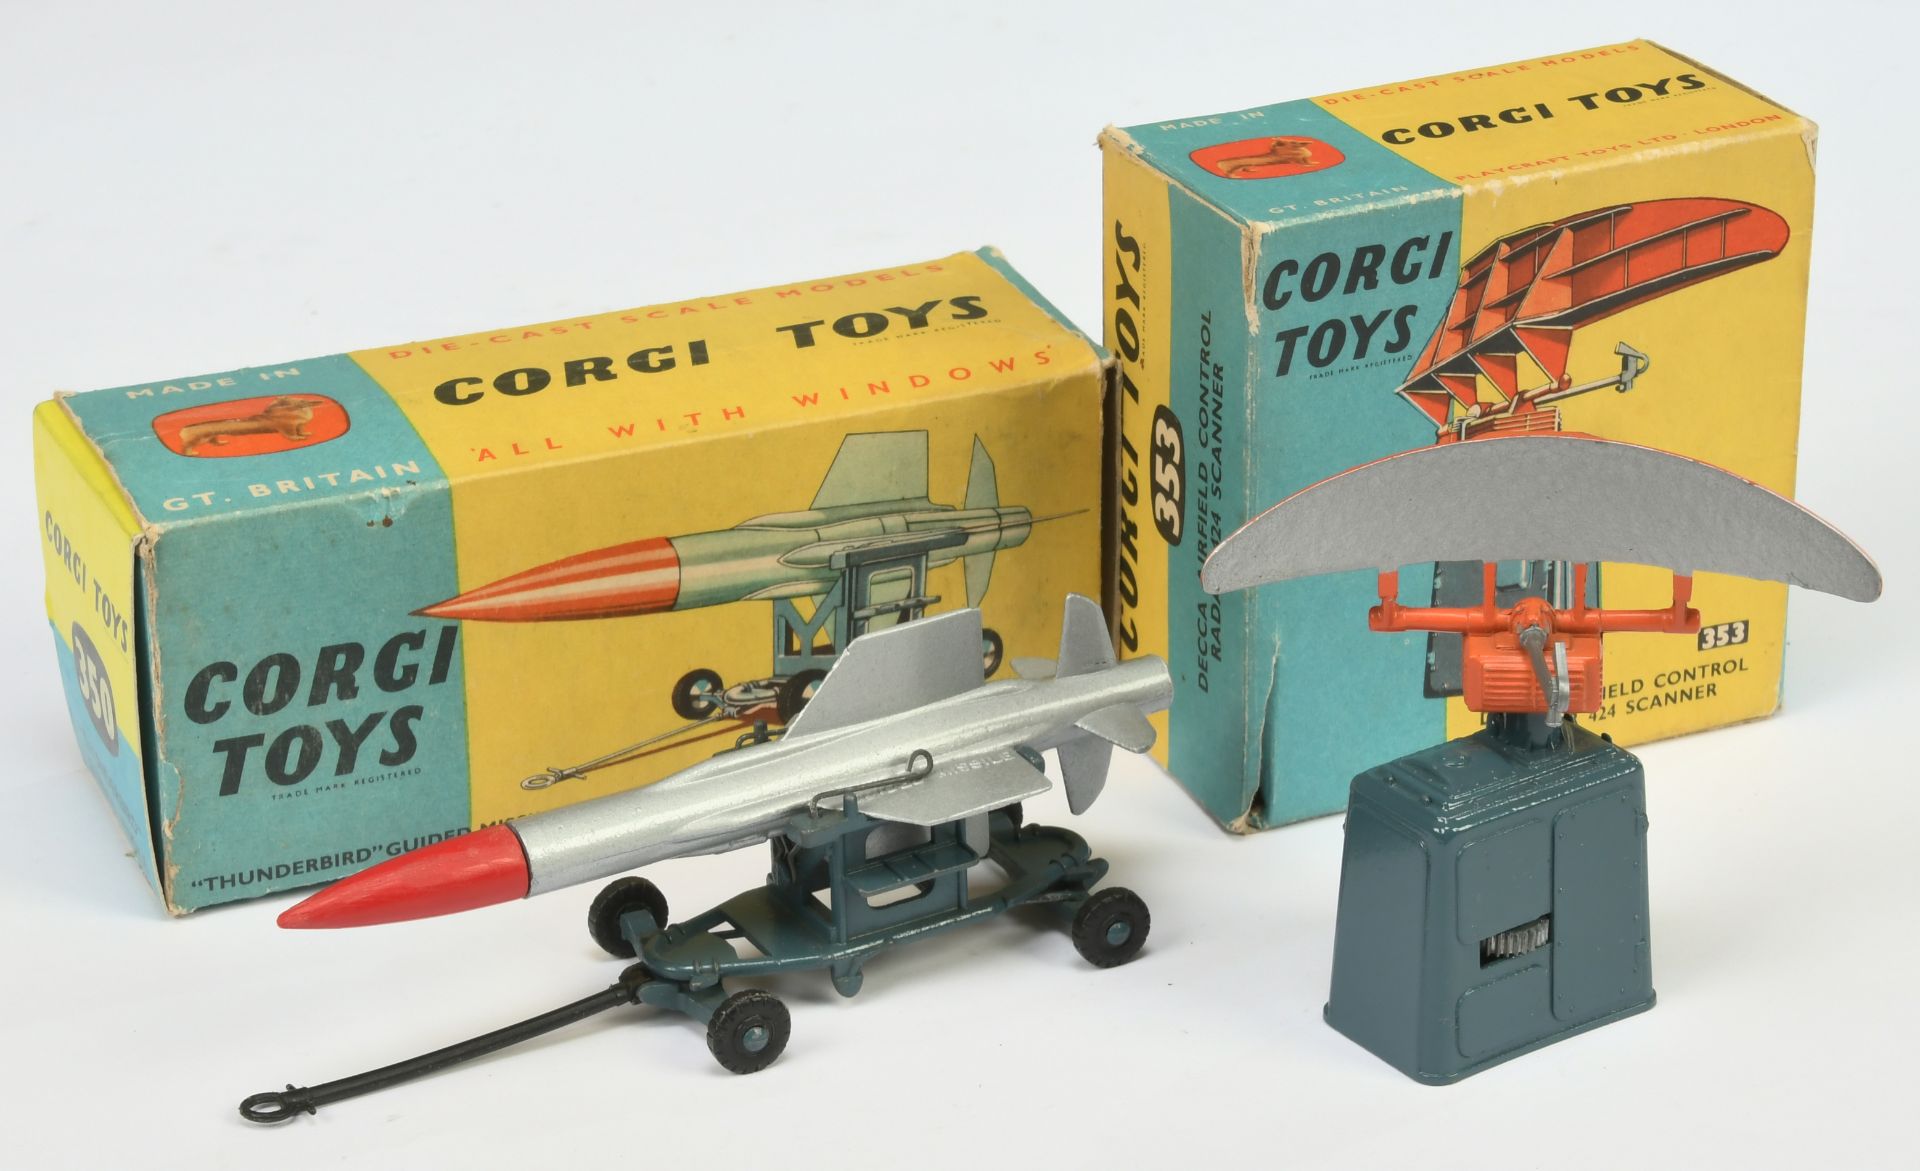 Corgi Toys 350  "RAF" Thunderbird Missile On Trolley - silver and red missile on Greyish-blue tro...